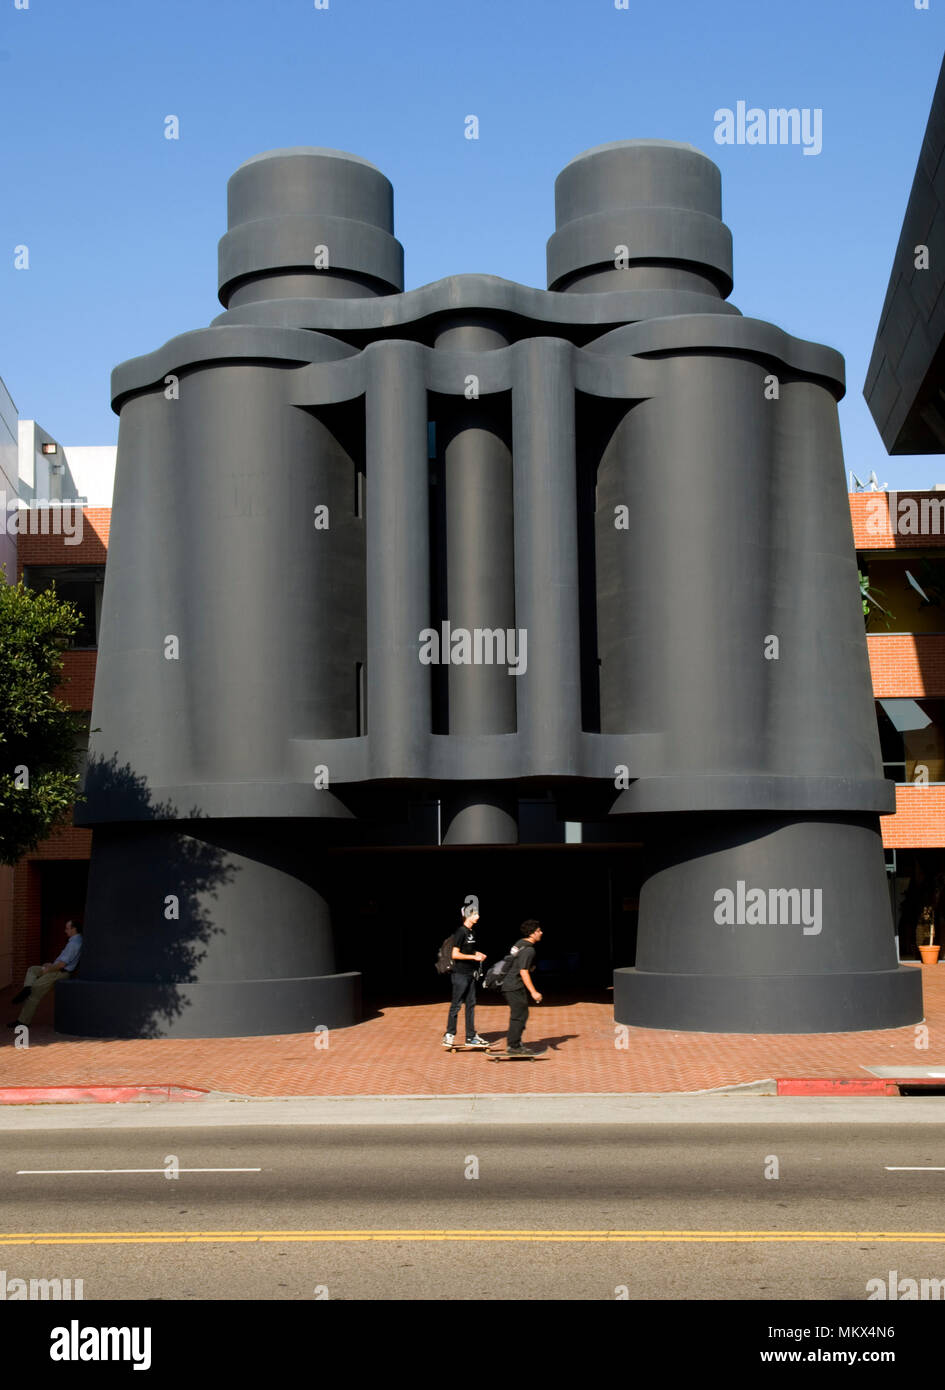 Giant binoculars in front of building designed by architect Frank Gehry in  Venice Beach, California Stock Photo - Alamy